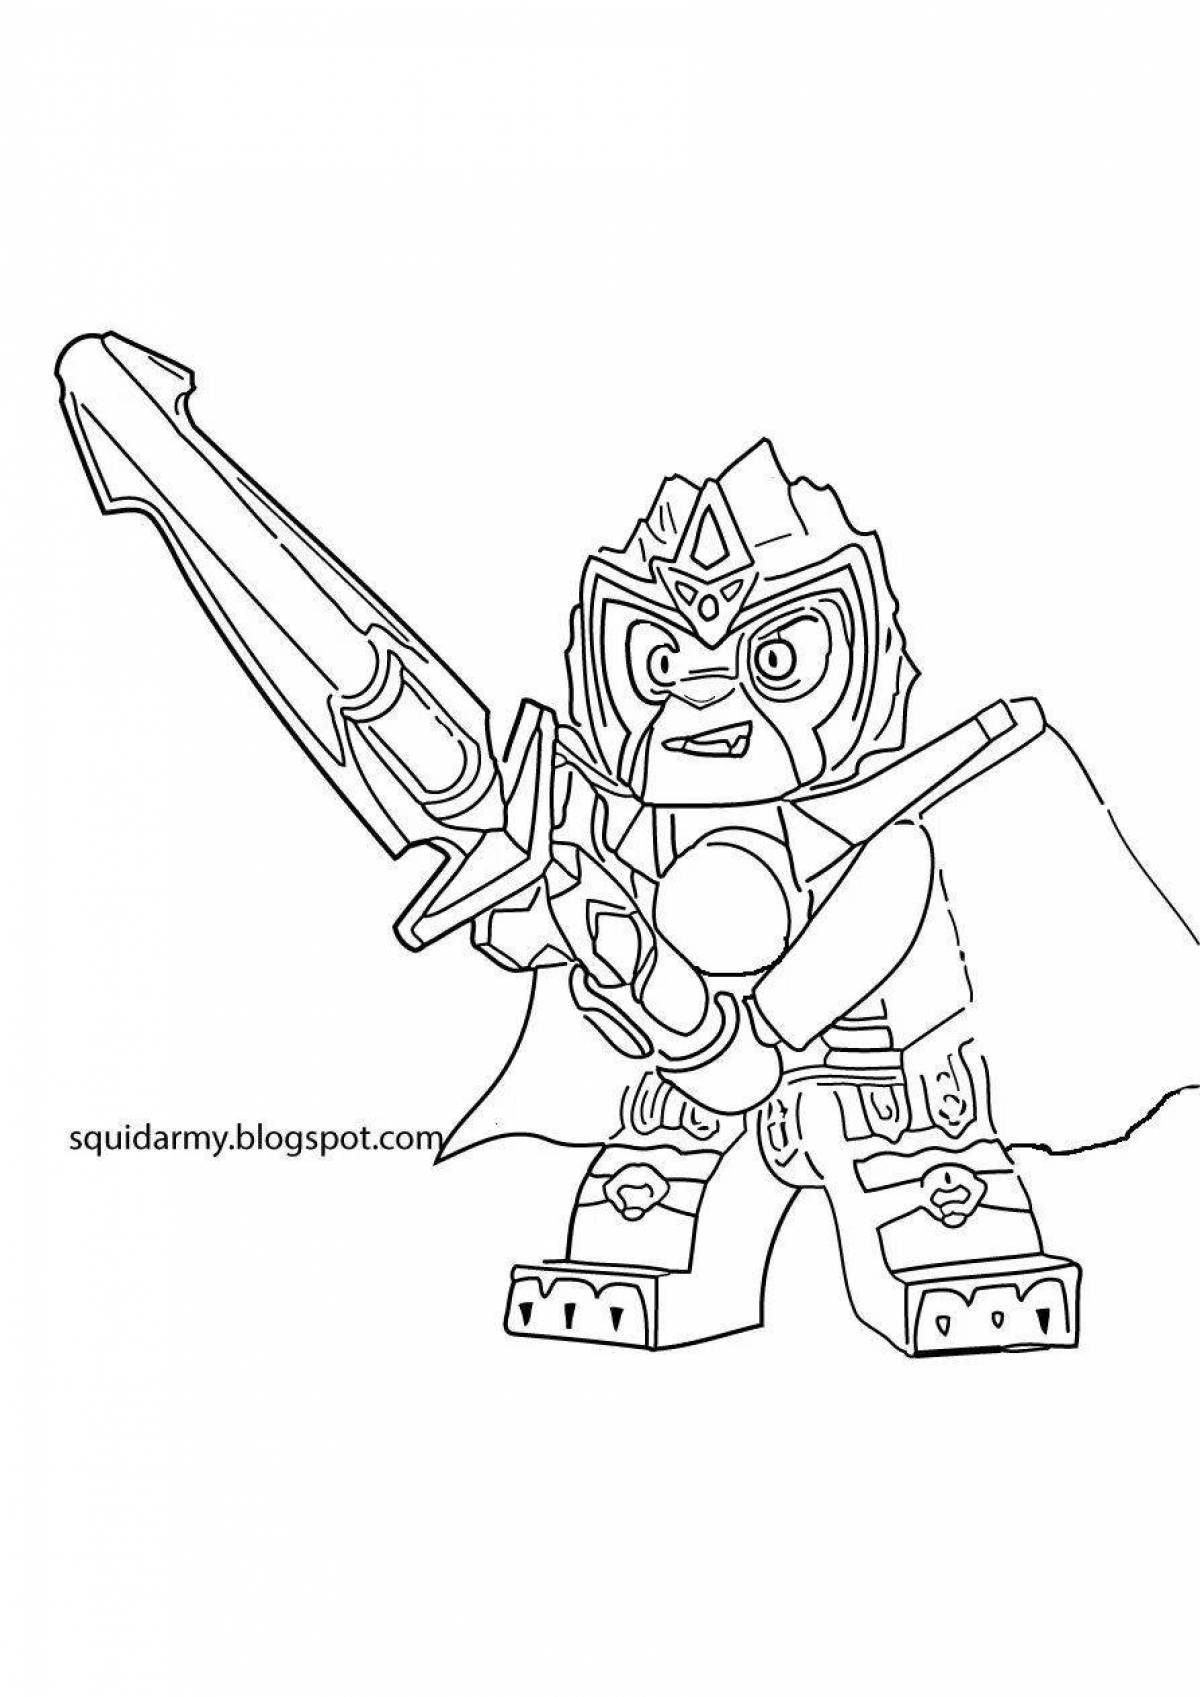 Amazing lego chima coloring page